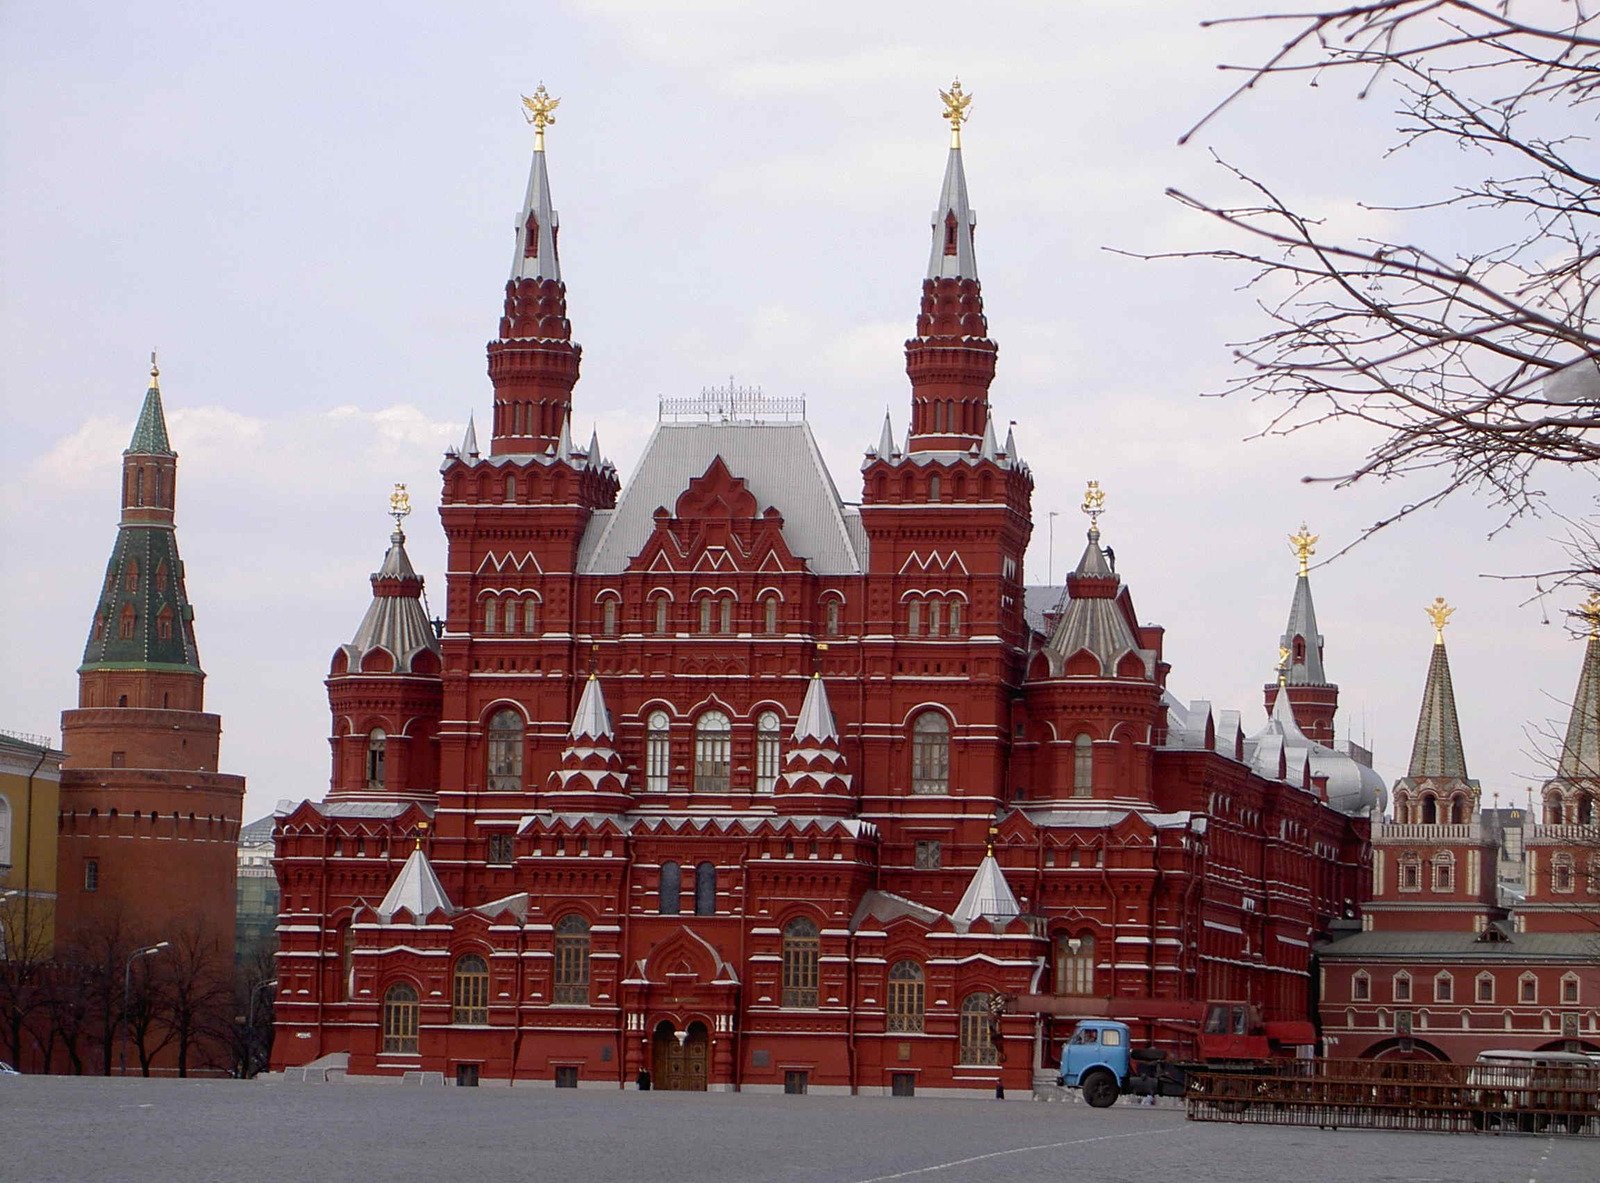 a large red building with some towers and spires